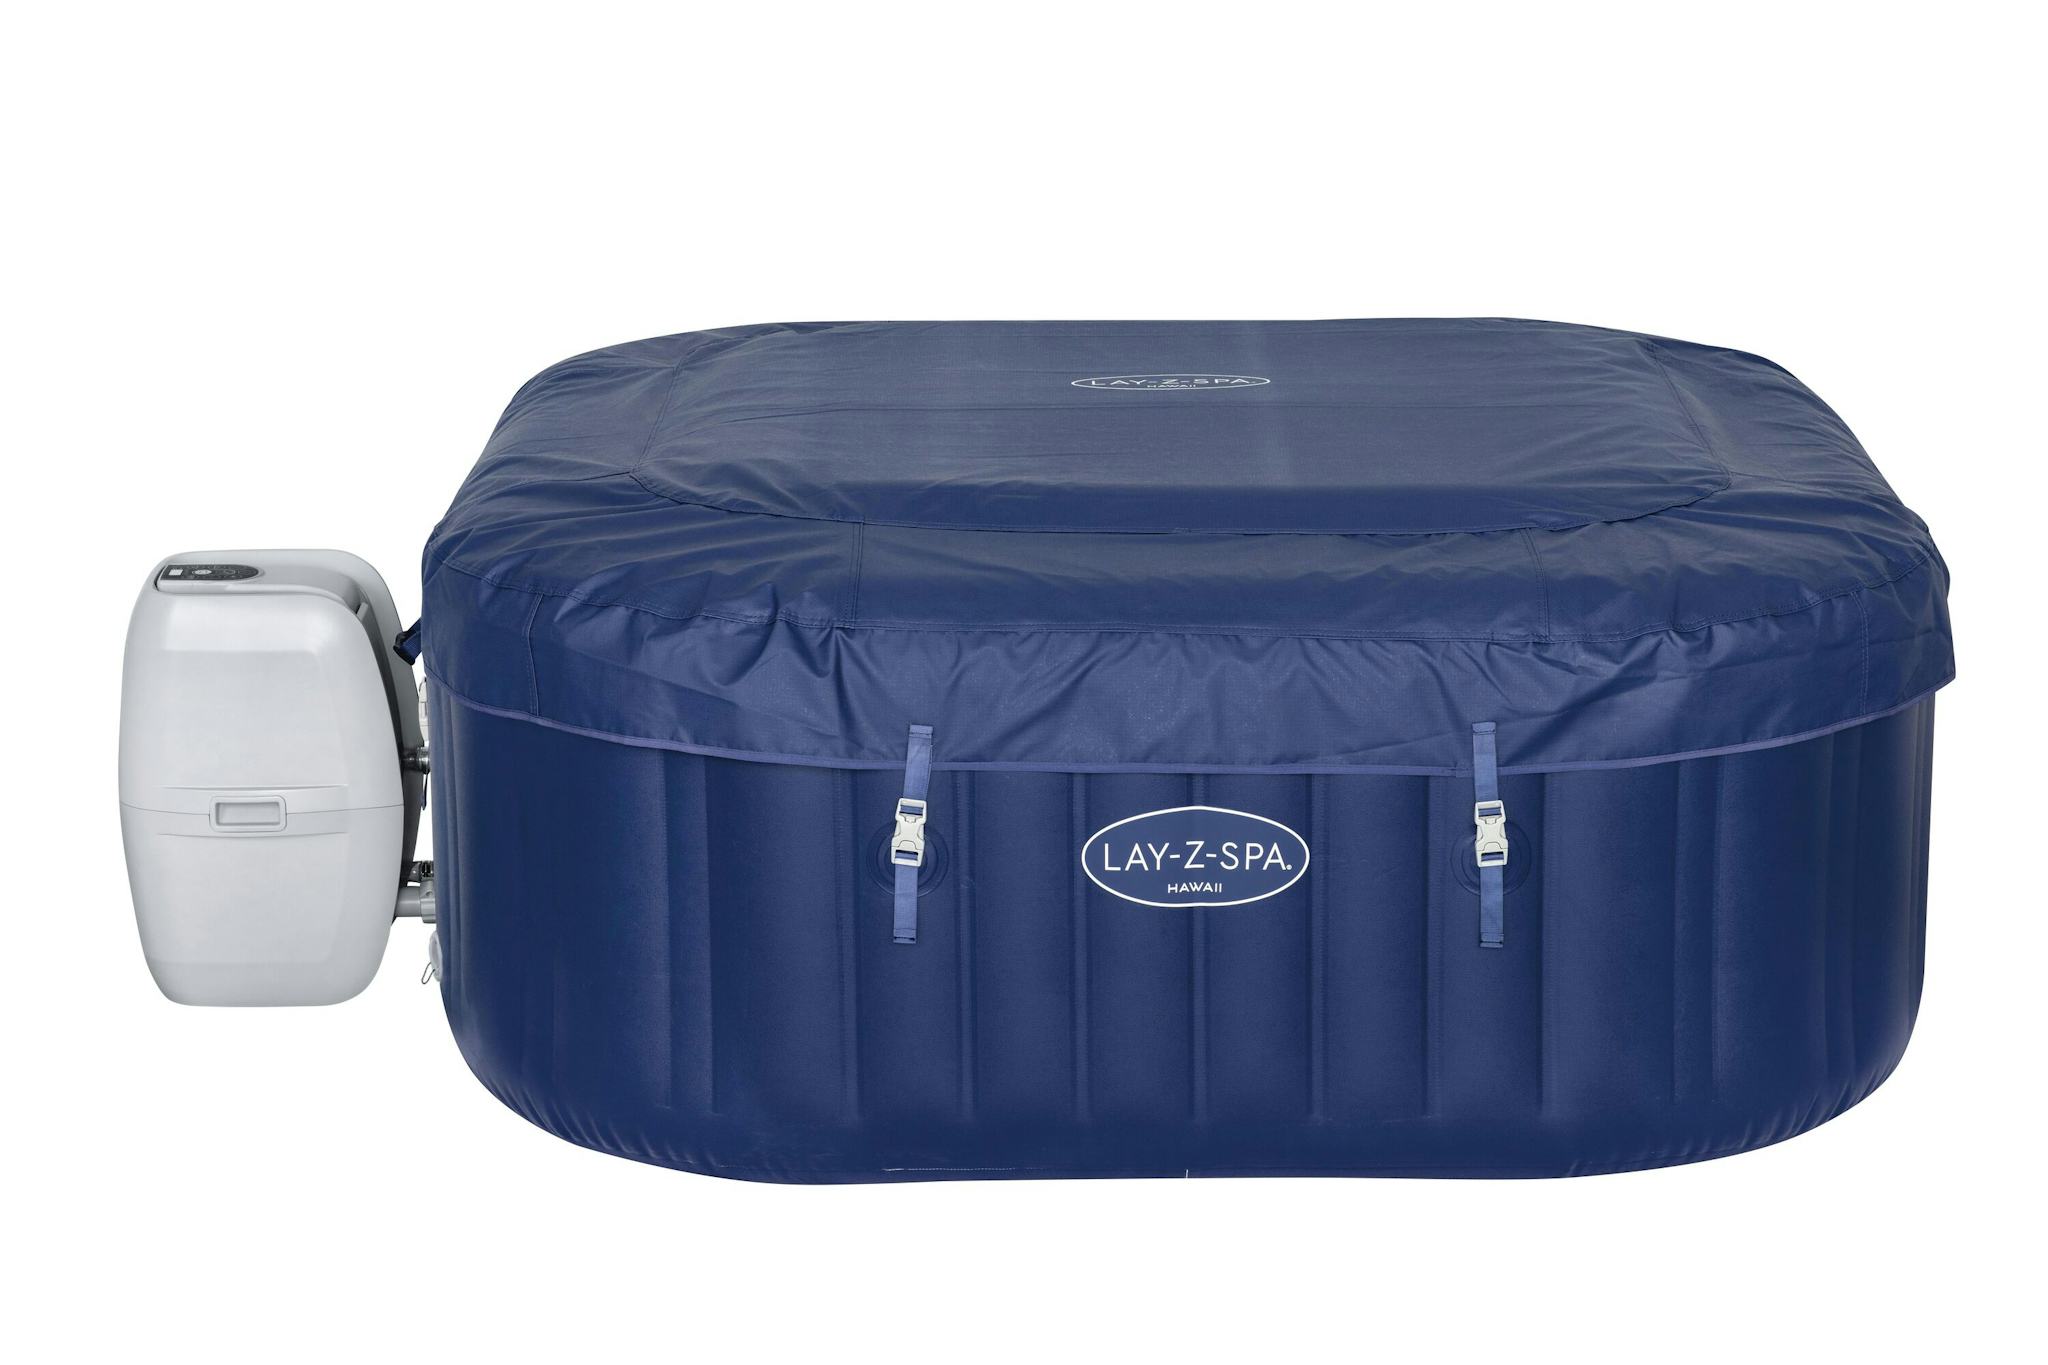 Spas Gonflables Spa gonflable carré Lay-Z-Spa Hawaii Airjet™ 4 - 6 personnes Bestway 9